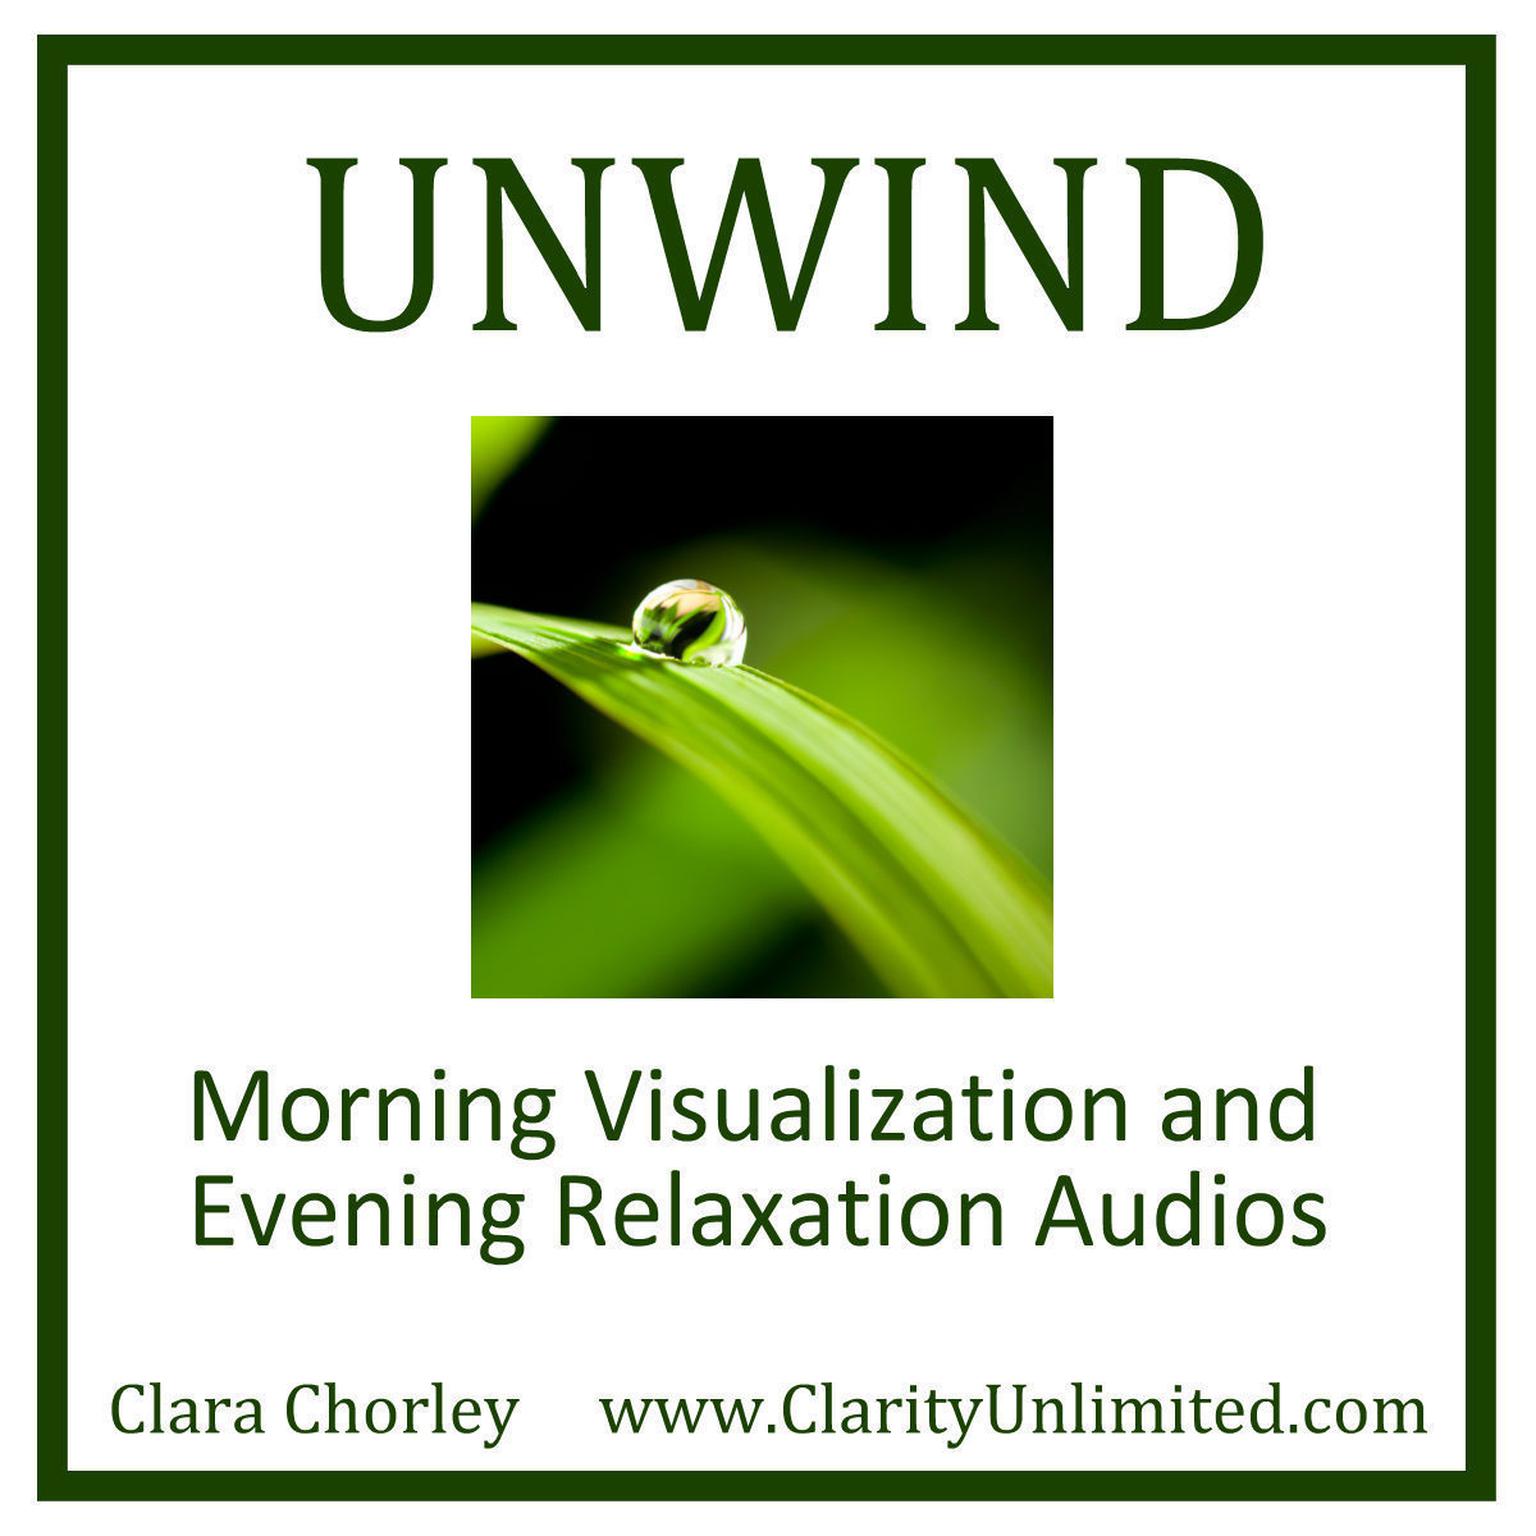 Unwind: Morning Visualazation and Evening Relaxation Audios Audiobook, by Clara Chorley